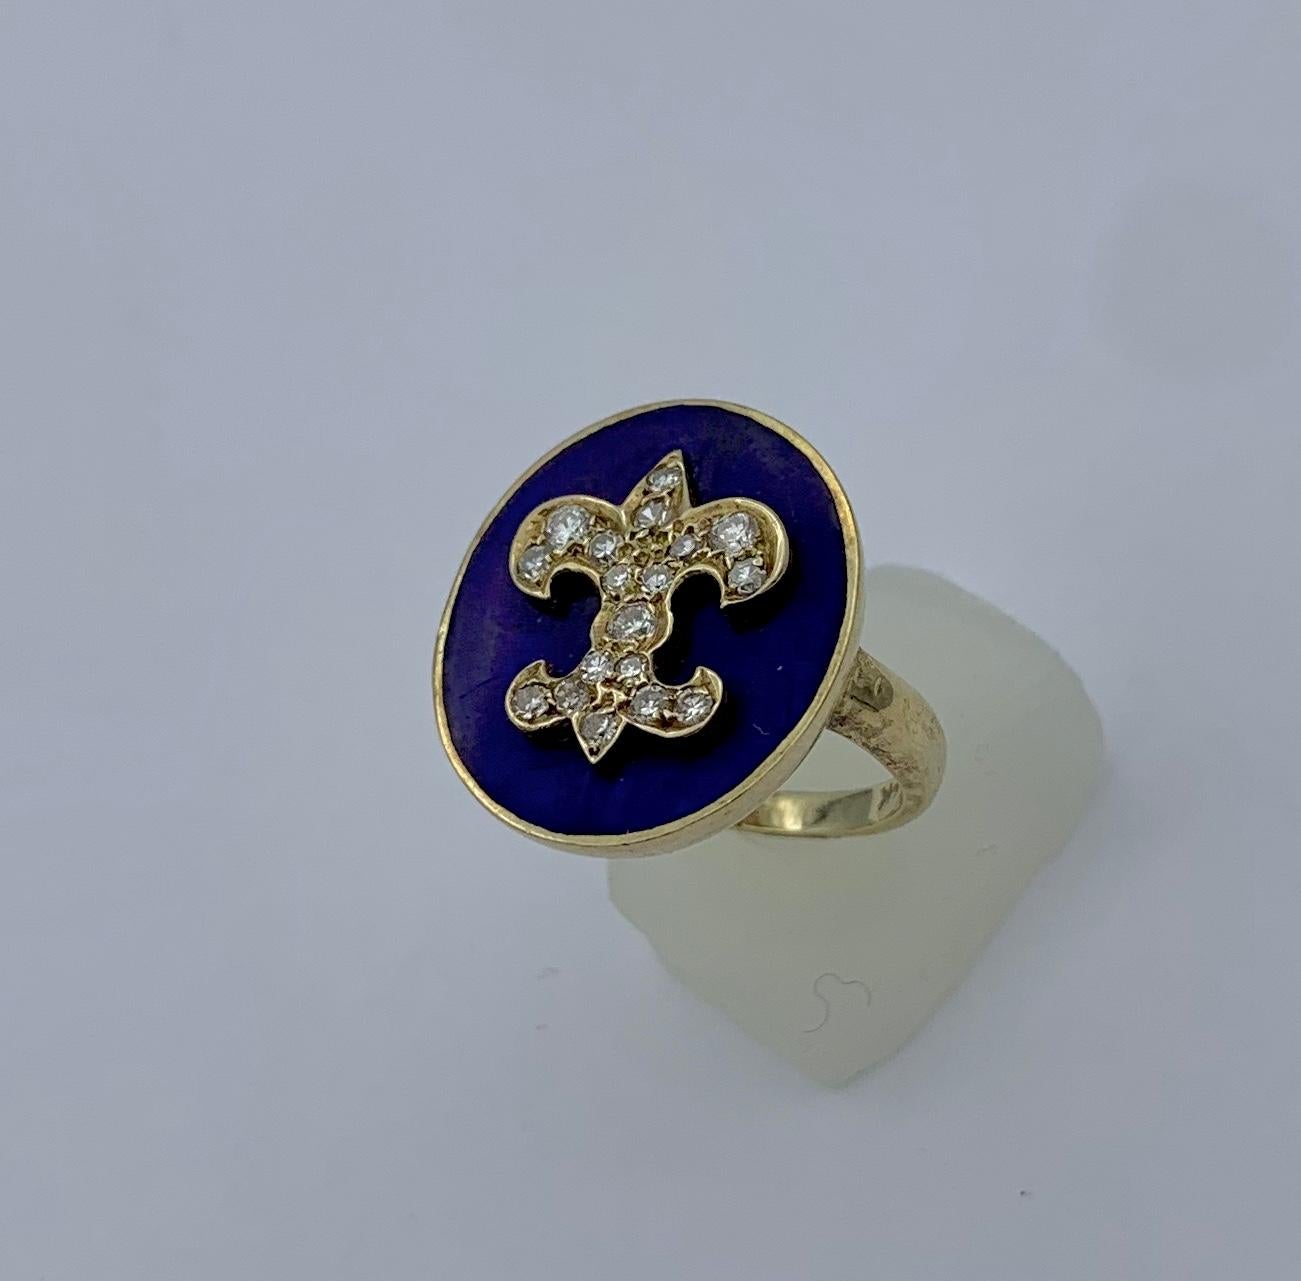 This is an absolutely stunning Antique Victorian Ring with a Diamond Fleurs-de-lis on a Royal Blue Enamel background in 14 Karat gold.  The sparkling white antique diamonds create the wonderful Fleurs-de-lis design.  The royal blue enamel background